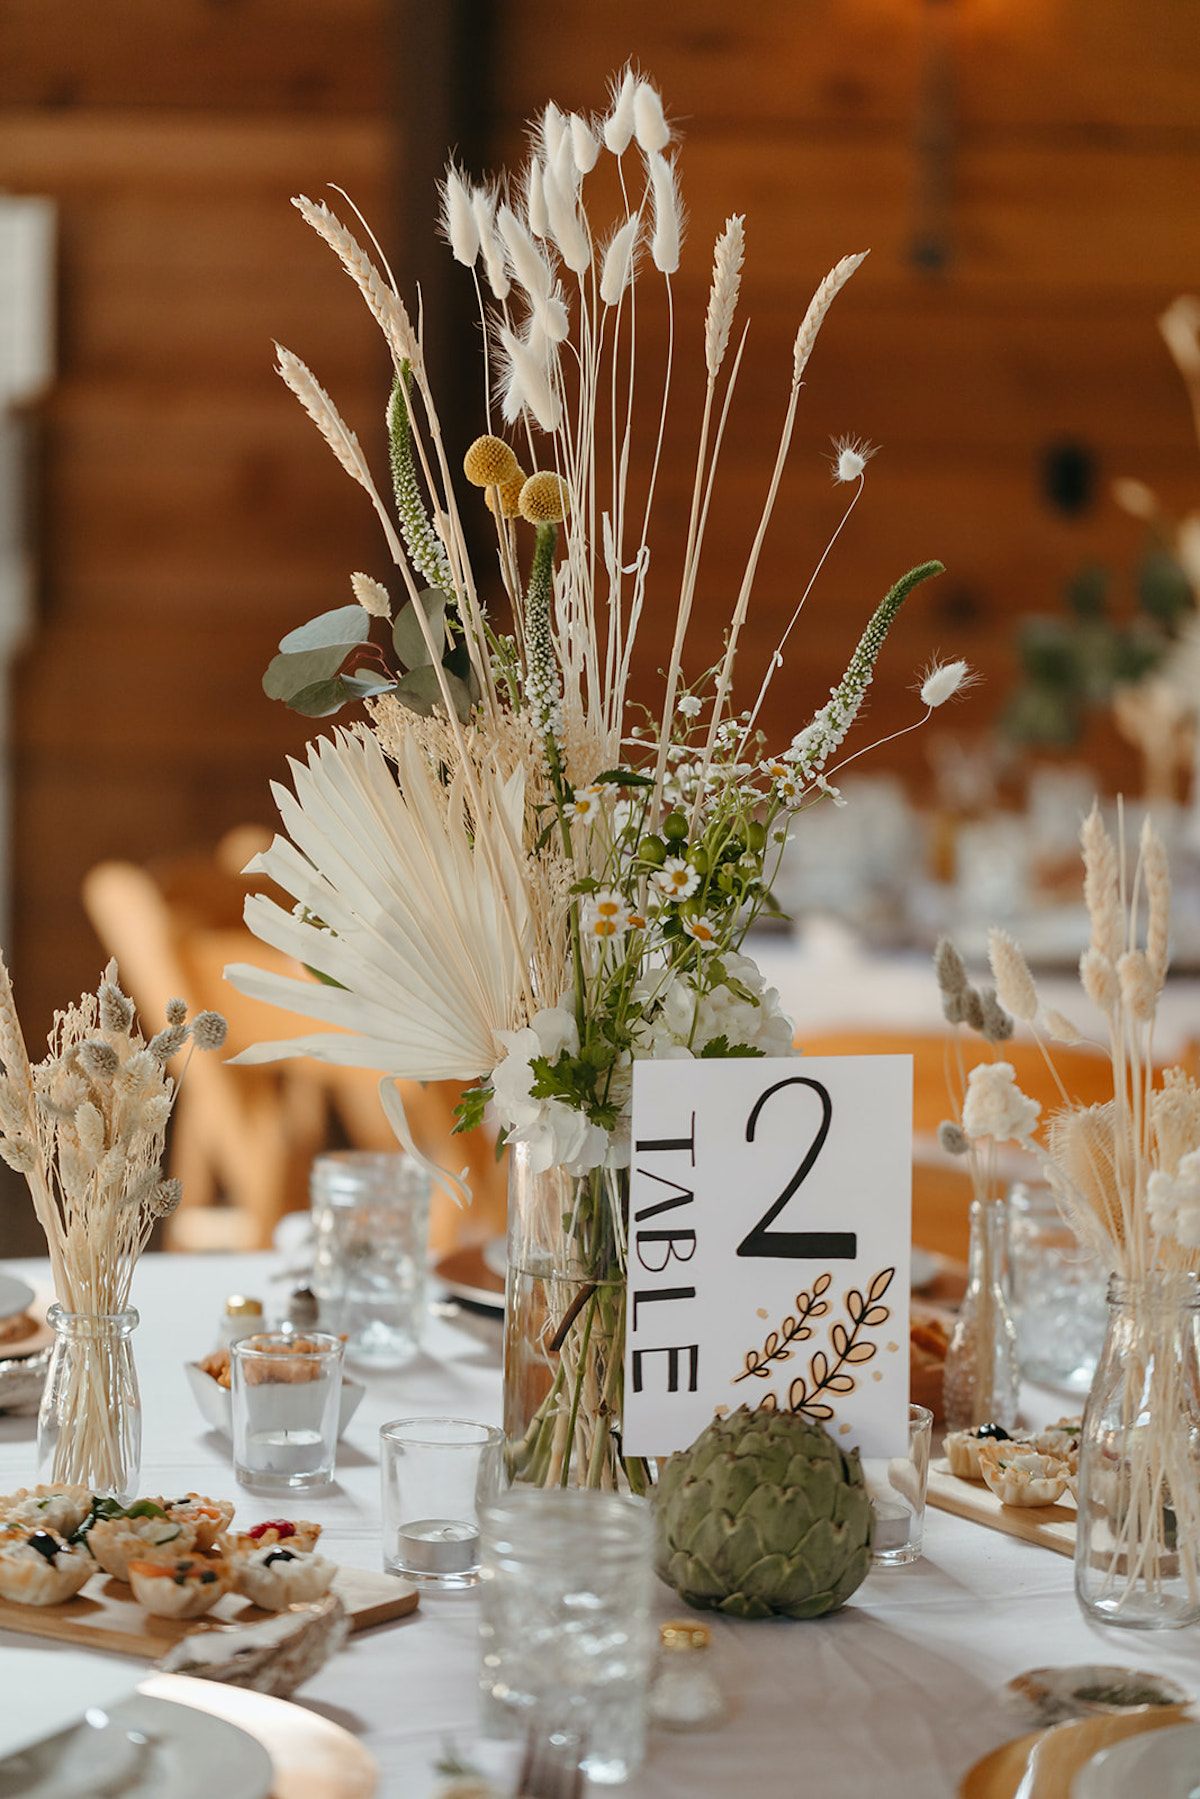 Ranch-inspired centerpieces